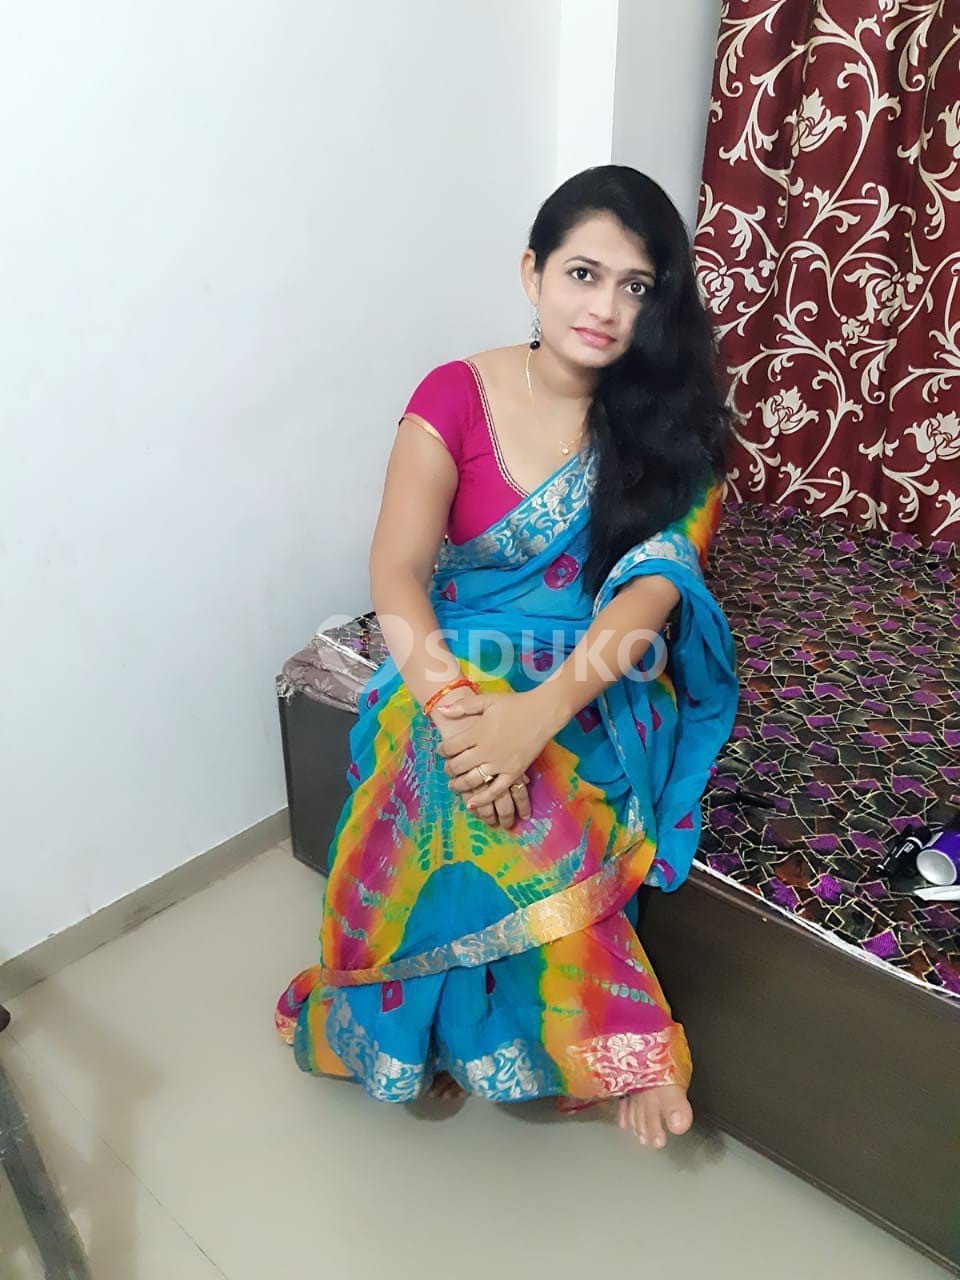 Azamgarh,,myself,,Mallika,,,TODAY LOW PRICE 100% SAFE AND SECURE GENUINE CALL GIRL AFFORDABLE PRICE CALL NOW